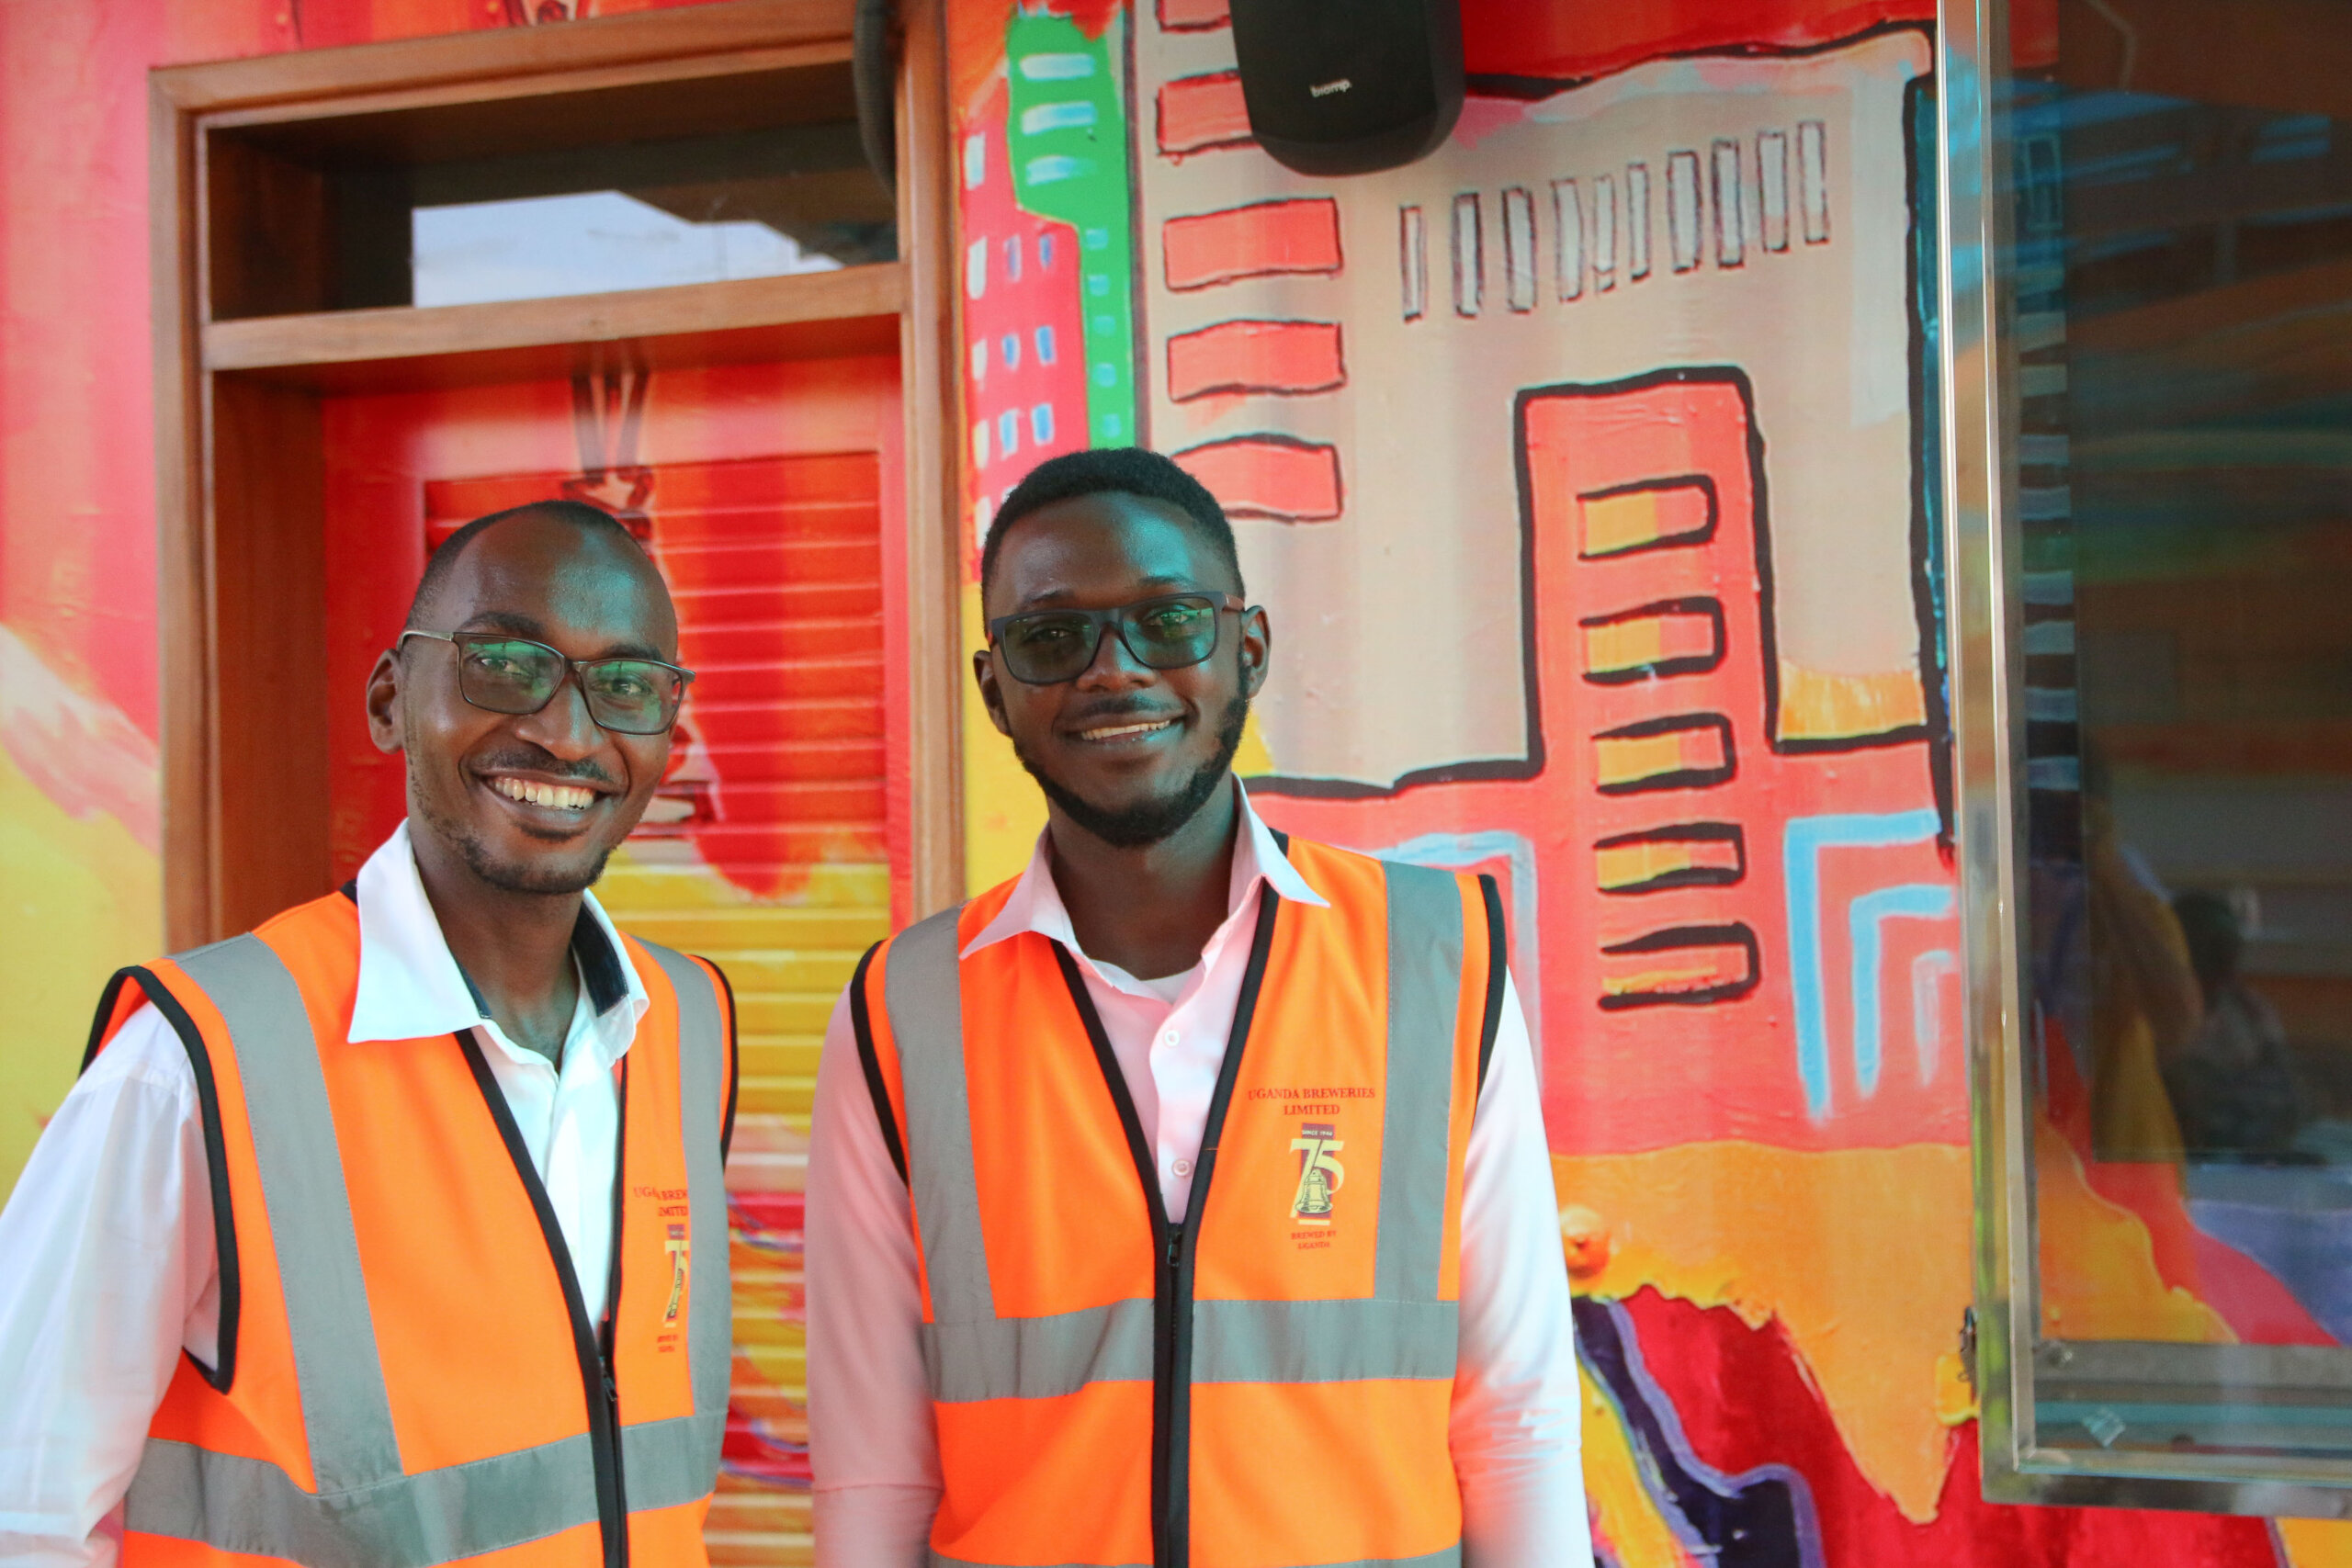 The image shows Higenyi Stuart Cypria (right), pictured smiling next to his team manager, Francis Xavier Kalanzi (left) wearing fluorescent work vests.